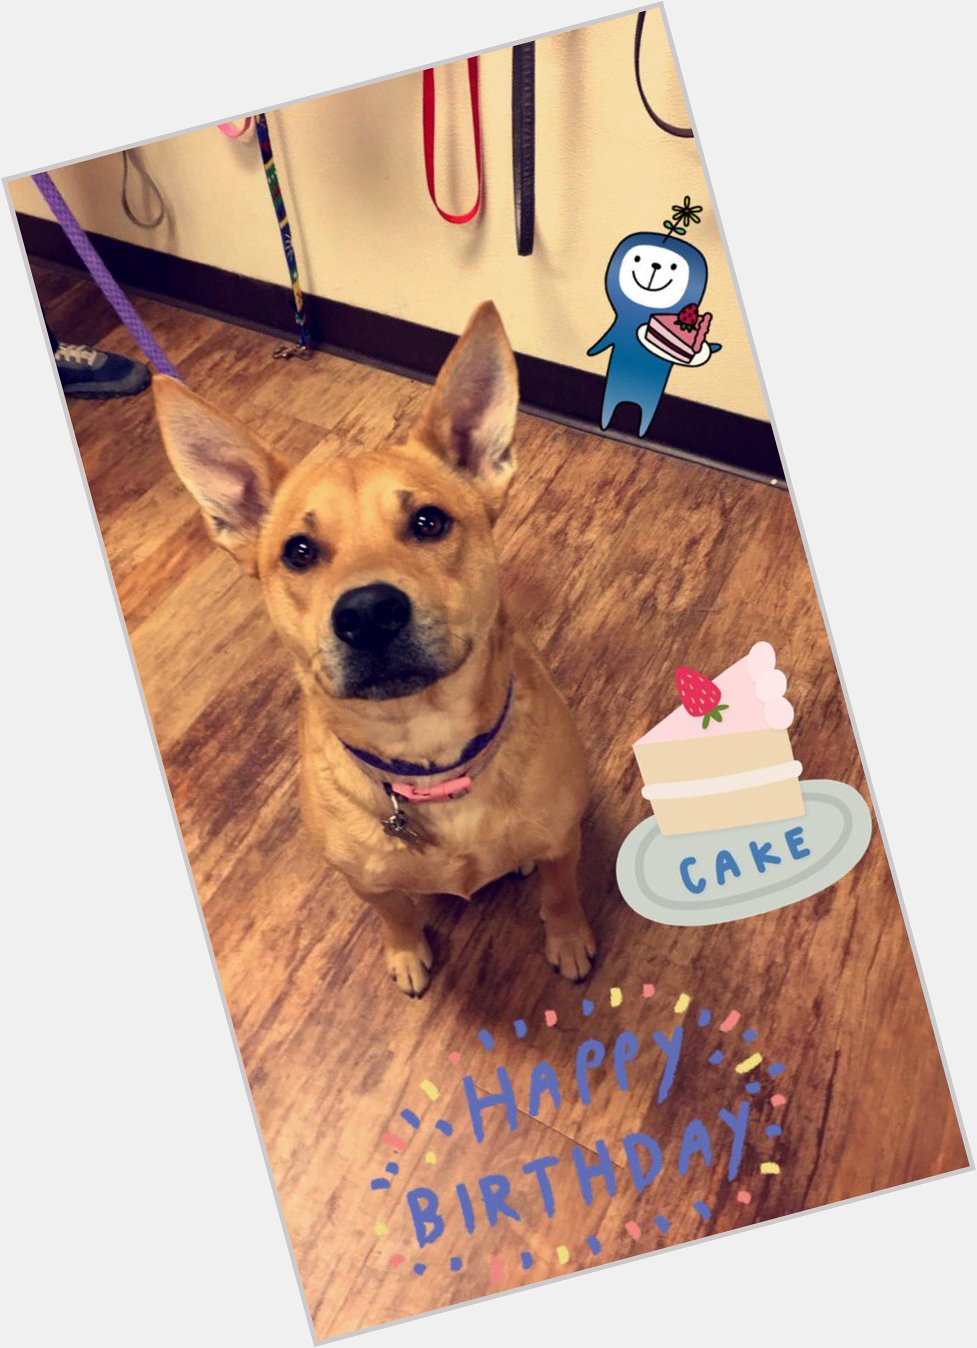 Camp Bow Wow Eatontown would like to wish Sarah a very Happy 2nd Birthday!   